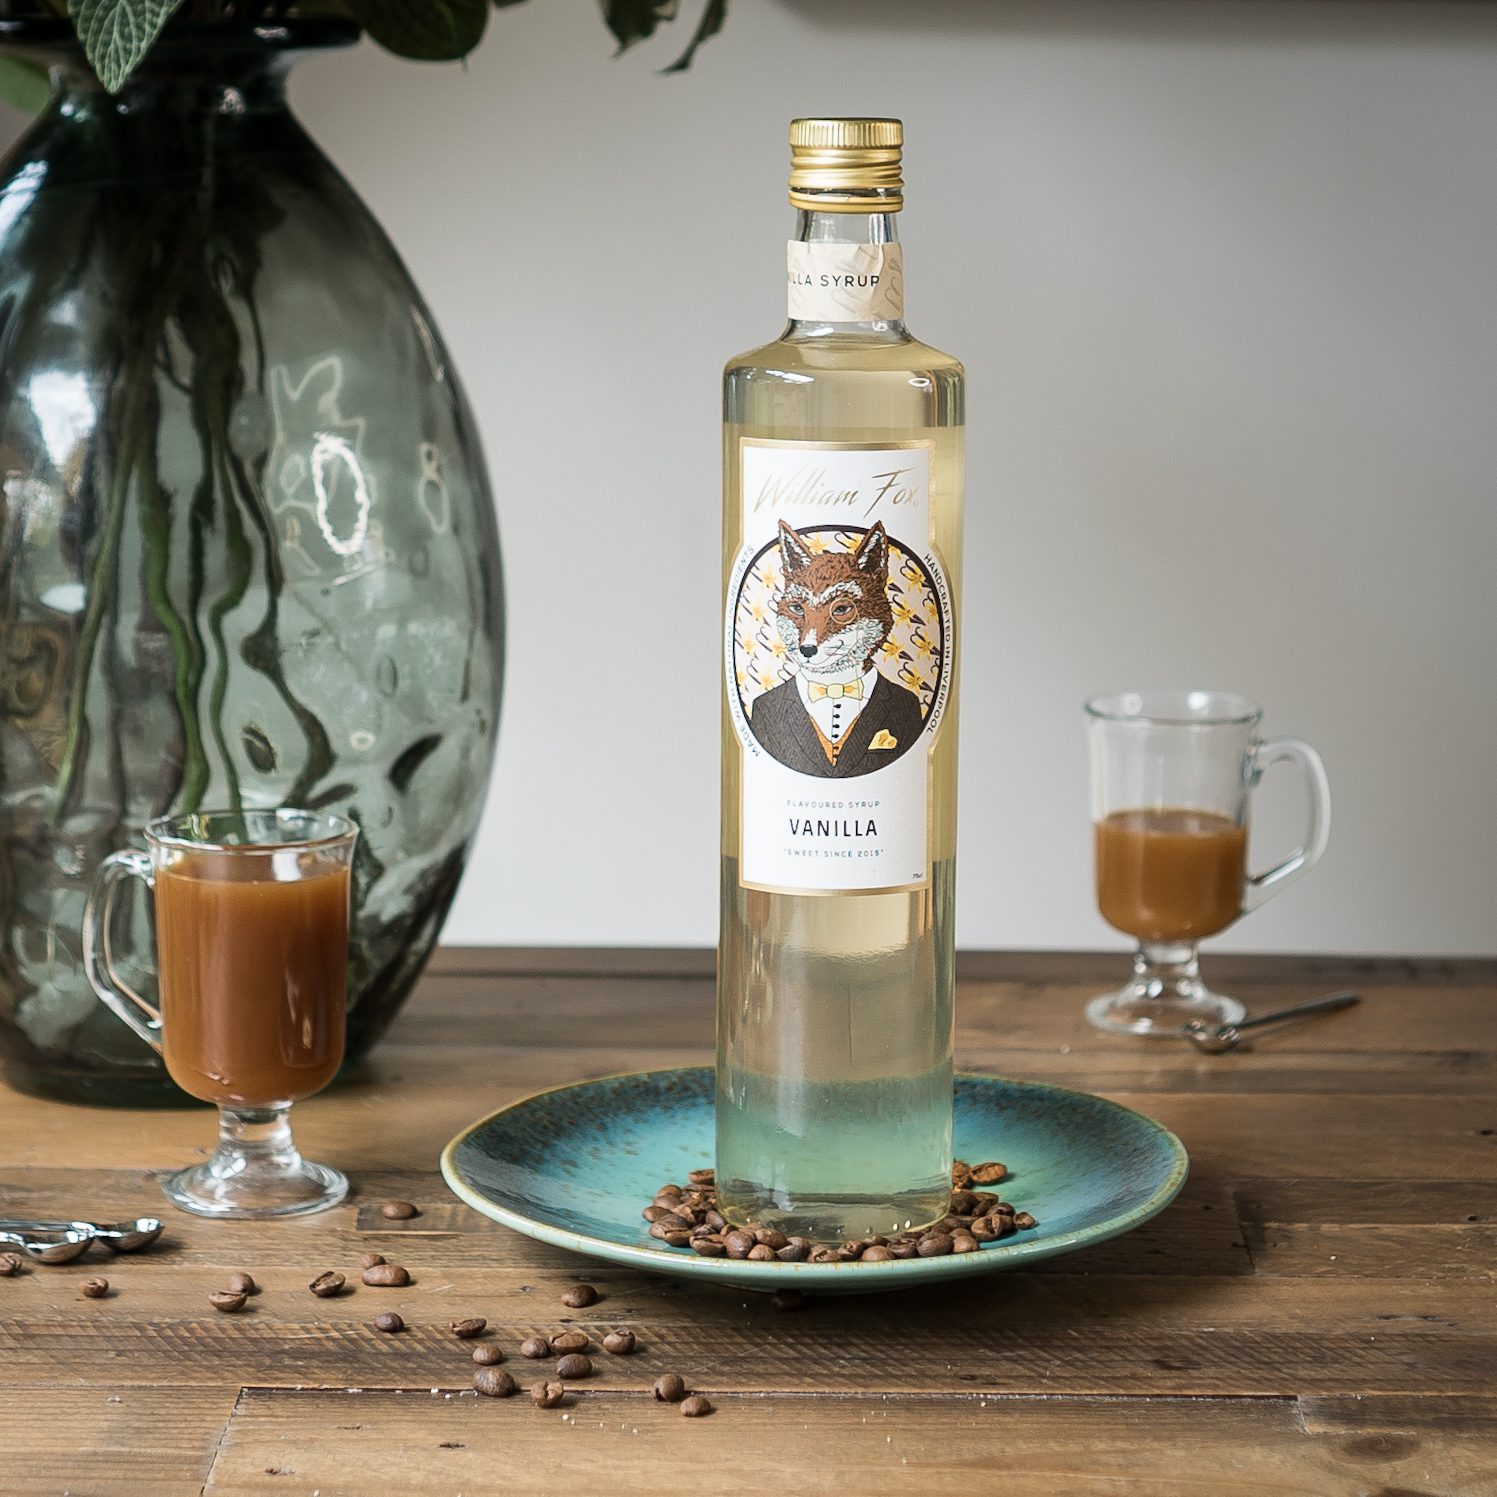 Bottle of coffee syrup on a blue plate with lattes in small glasses